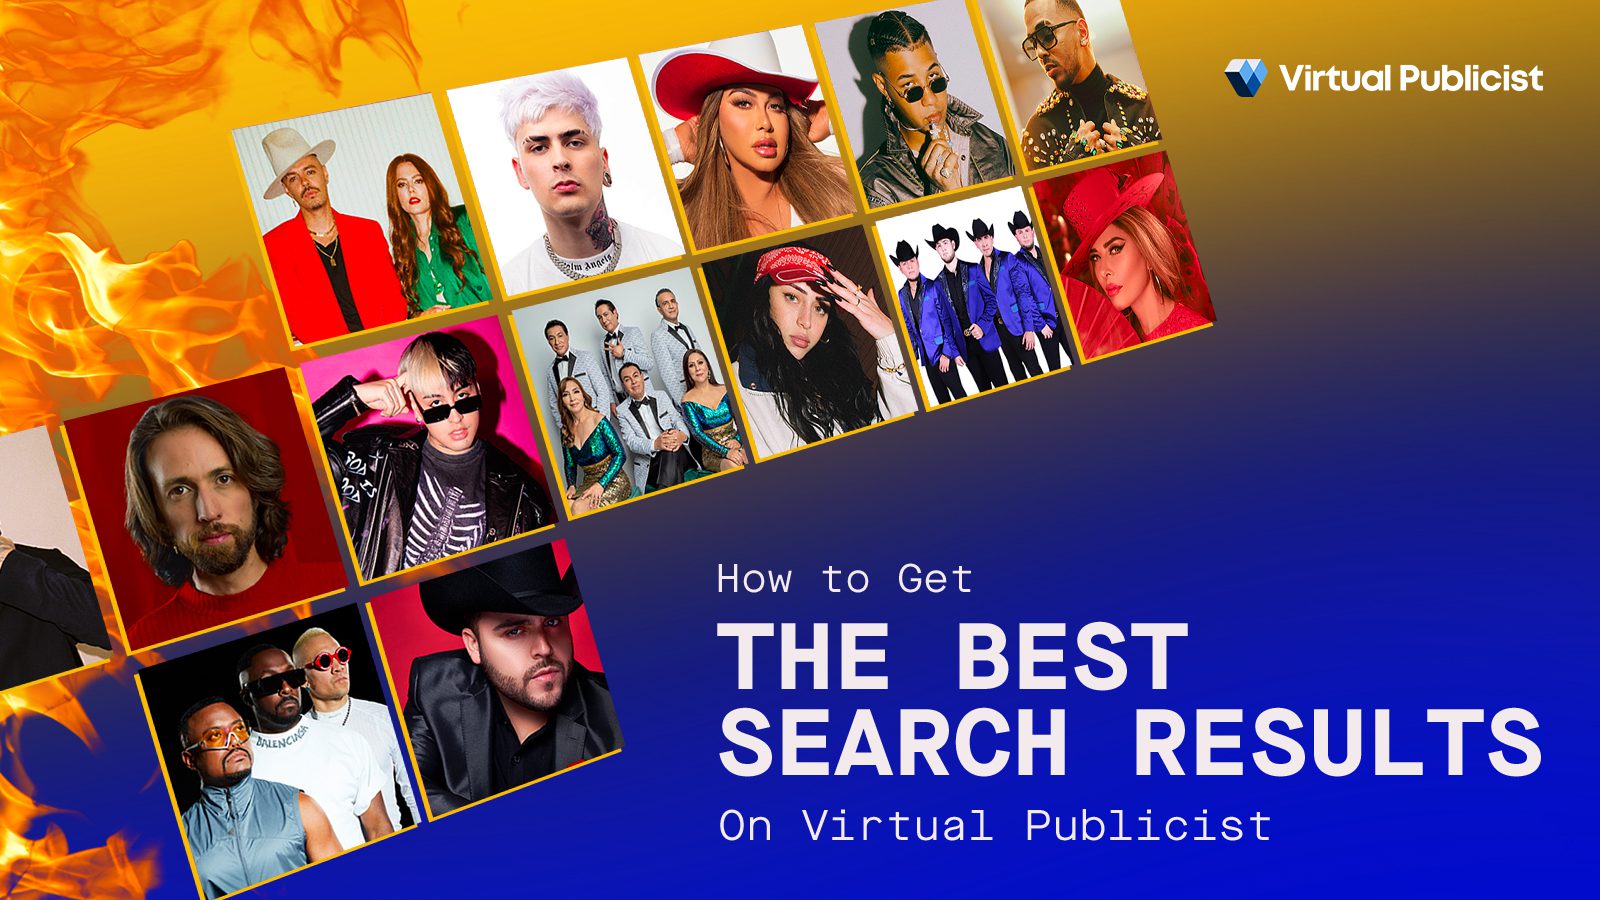 an image depicting how Virtual Publicist offers the best search results to optimize your outreach campaign